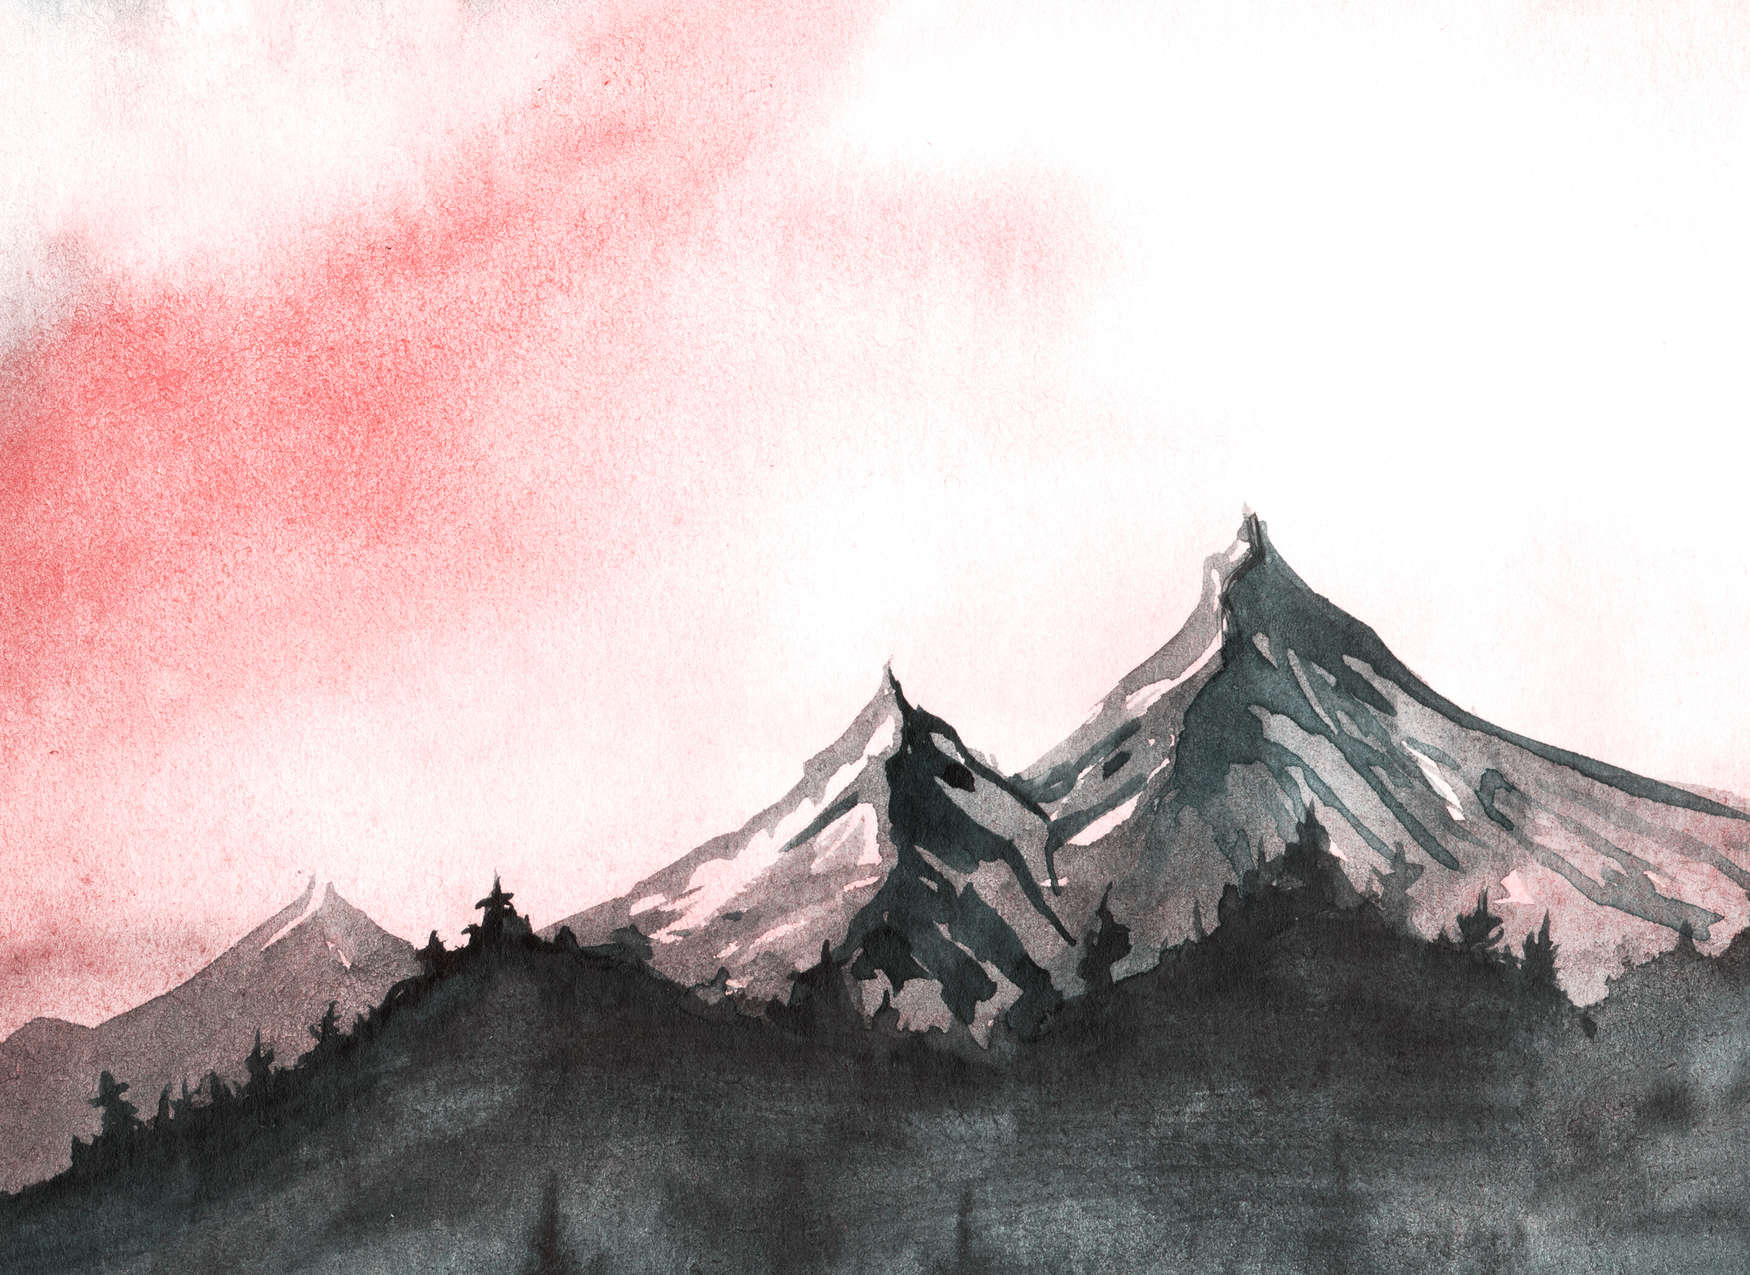             Mountain landscape in watercolour style - grey, pink
        